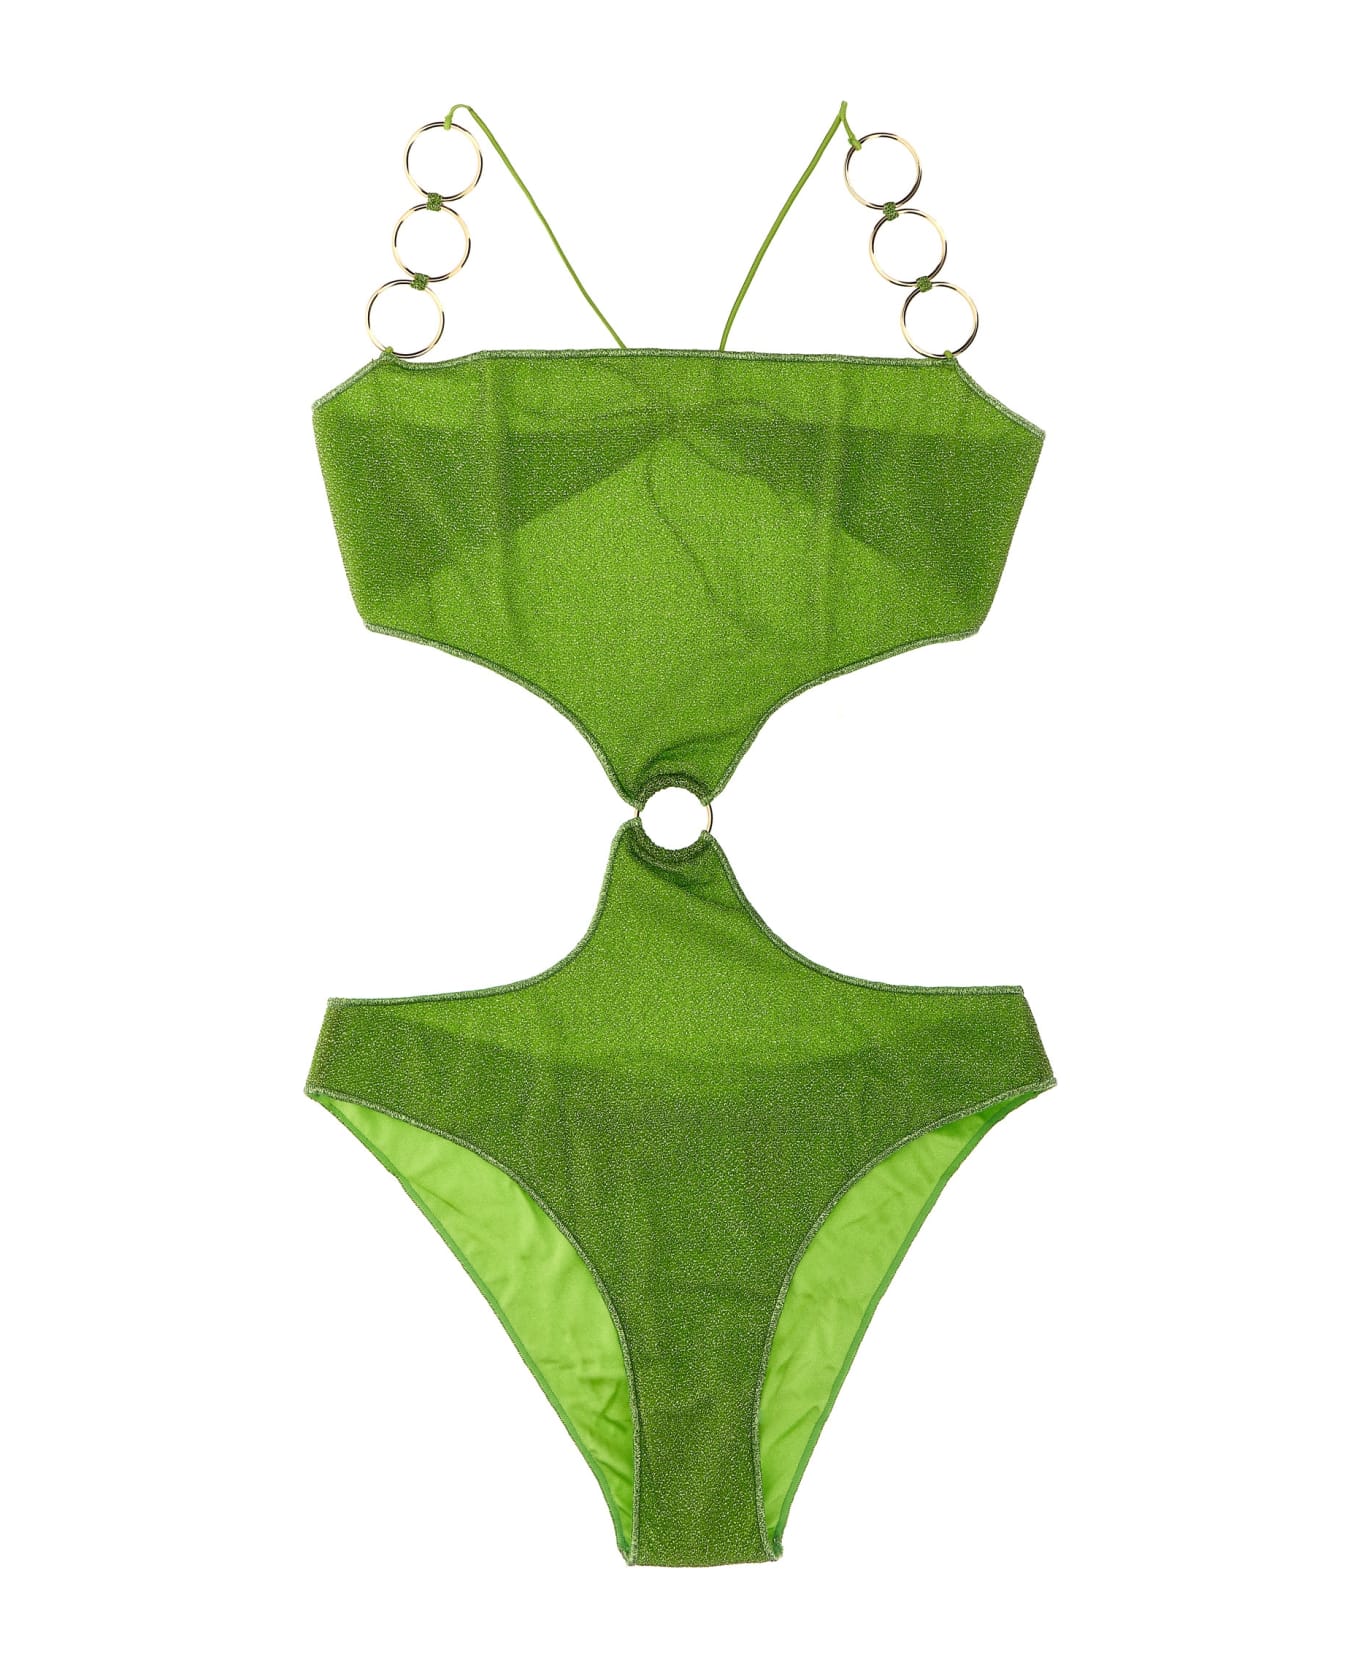 Oseree 'lumiere' One-piece Swimsuit - Green 水着